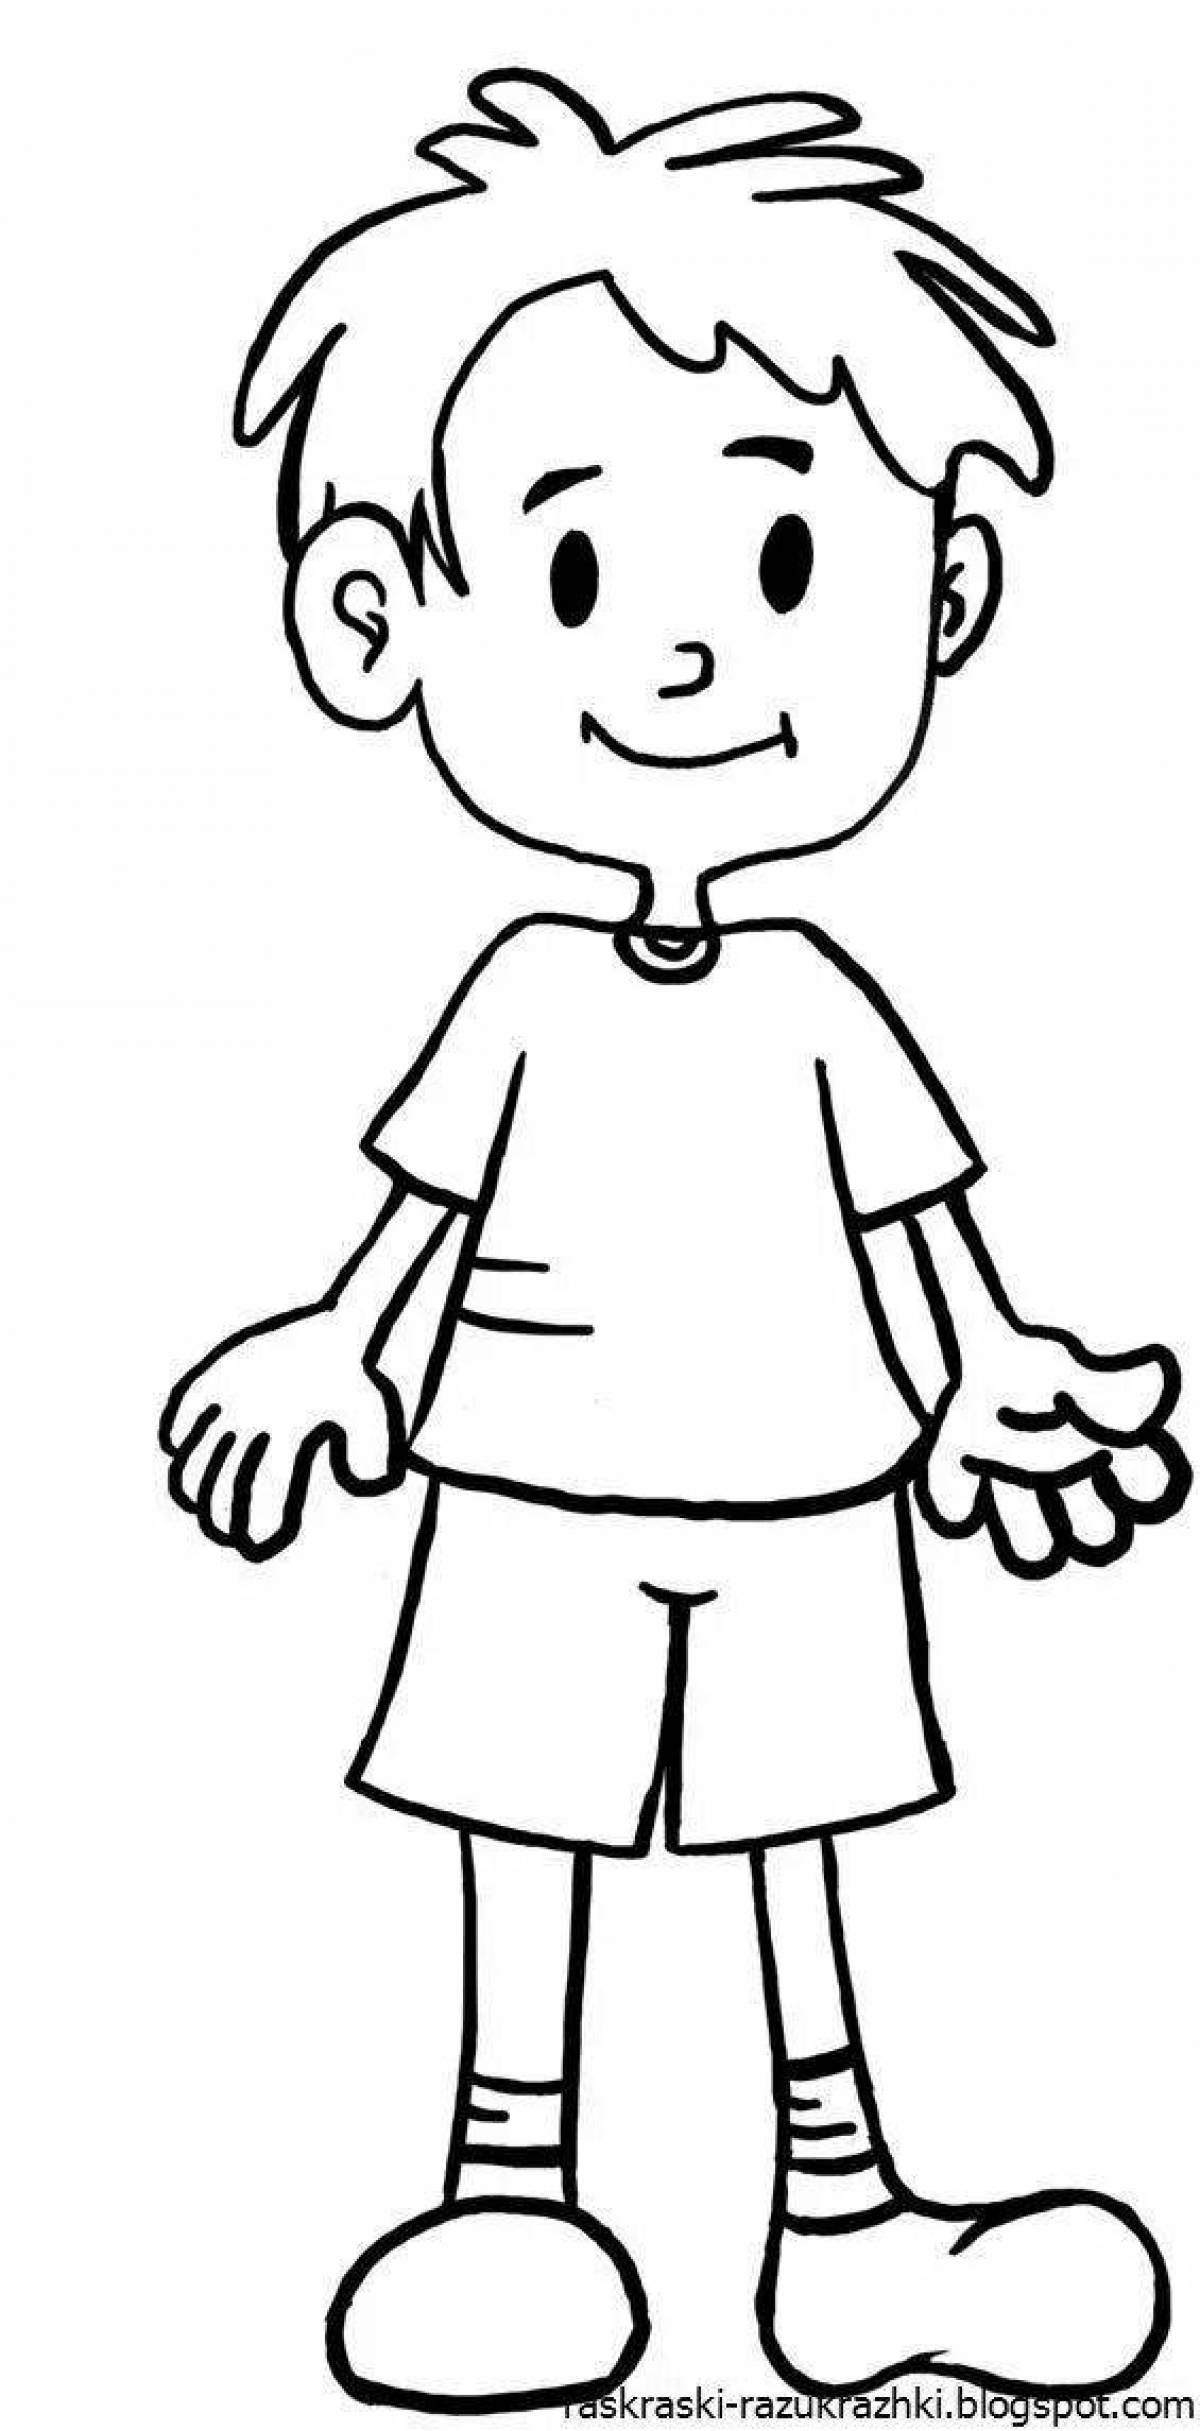 Color-frenzy coloring page person для детей 3-4 лет